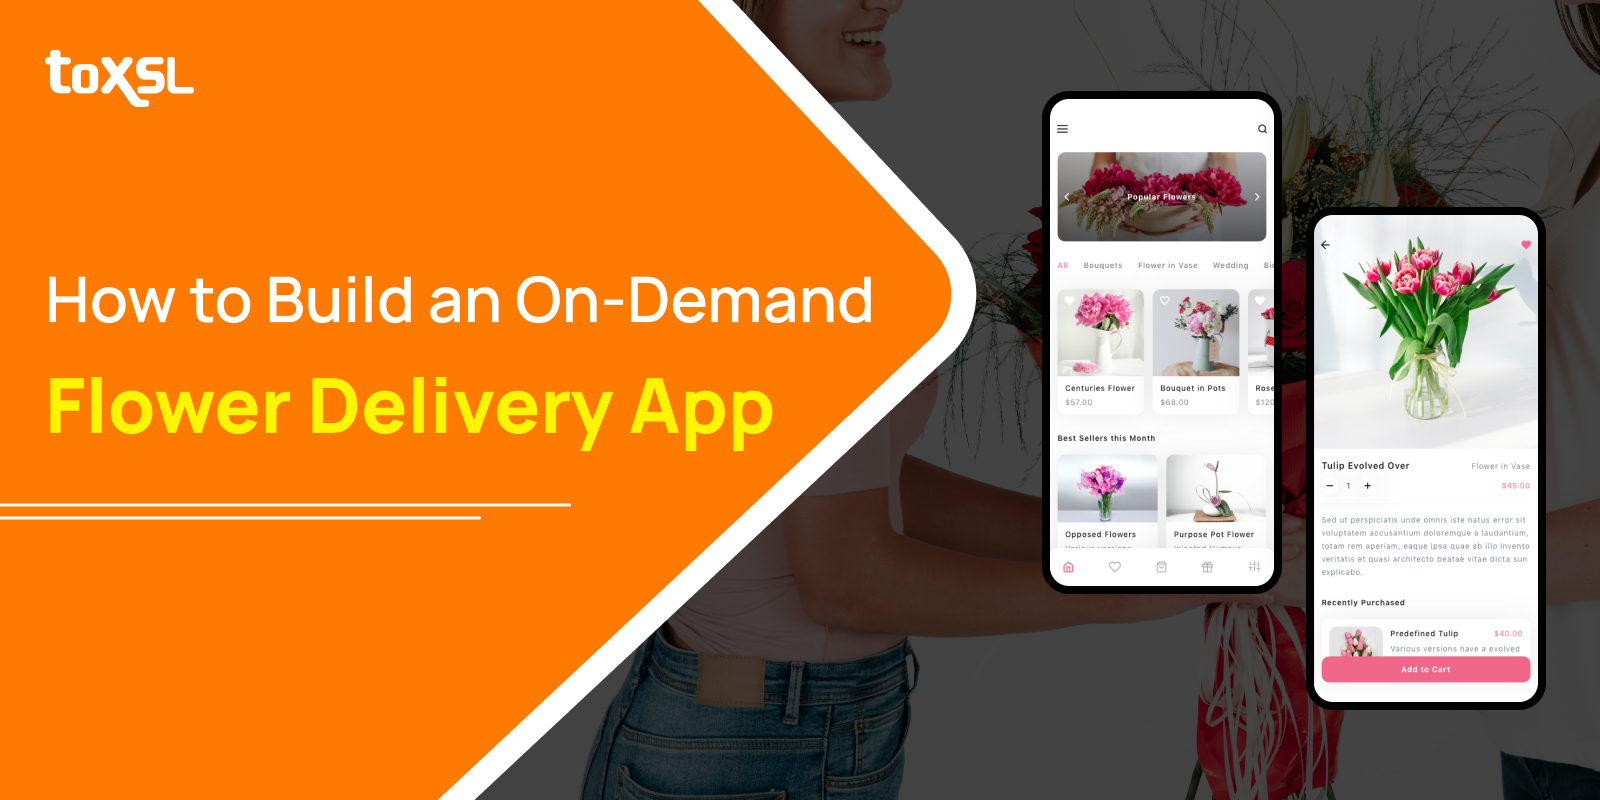 How to Build an On-Demand Flower Delivery App